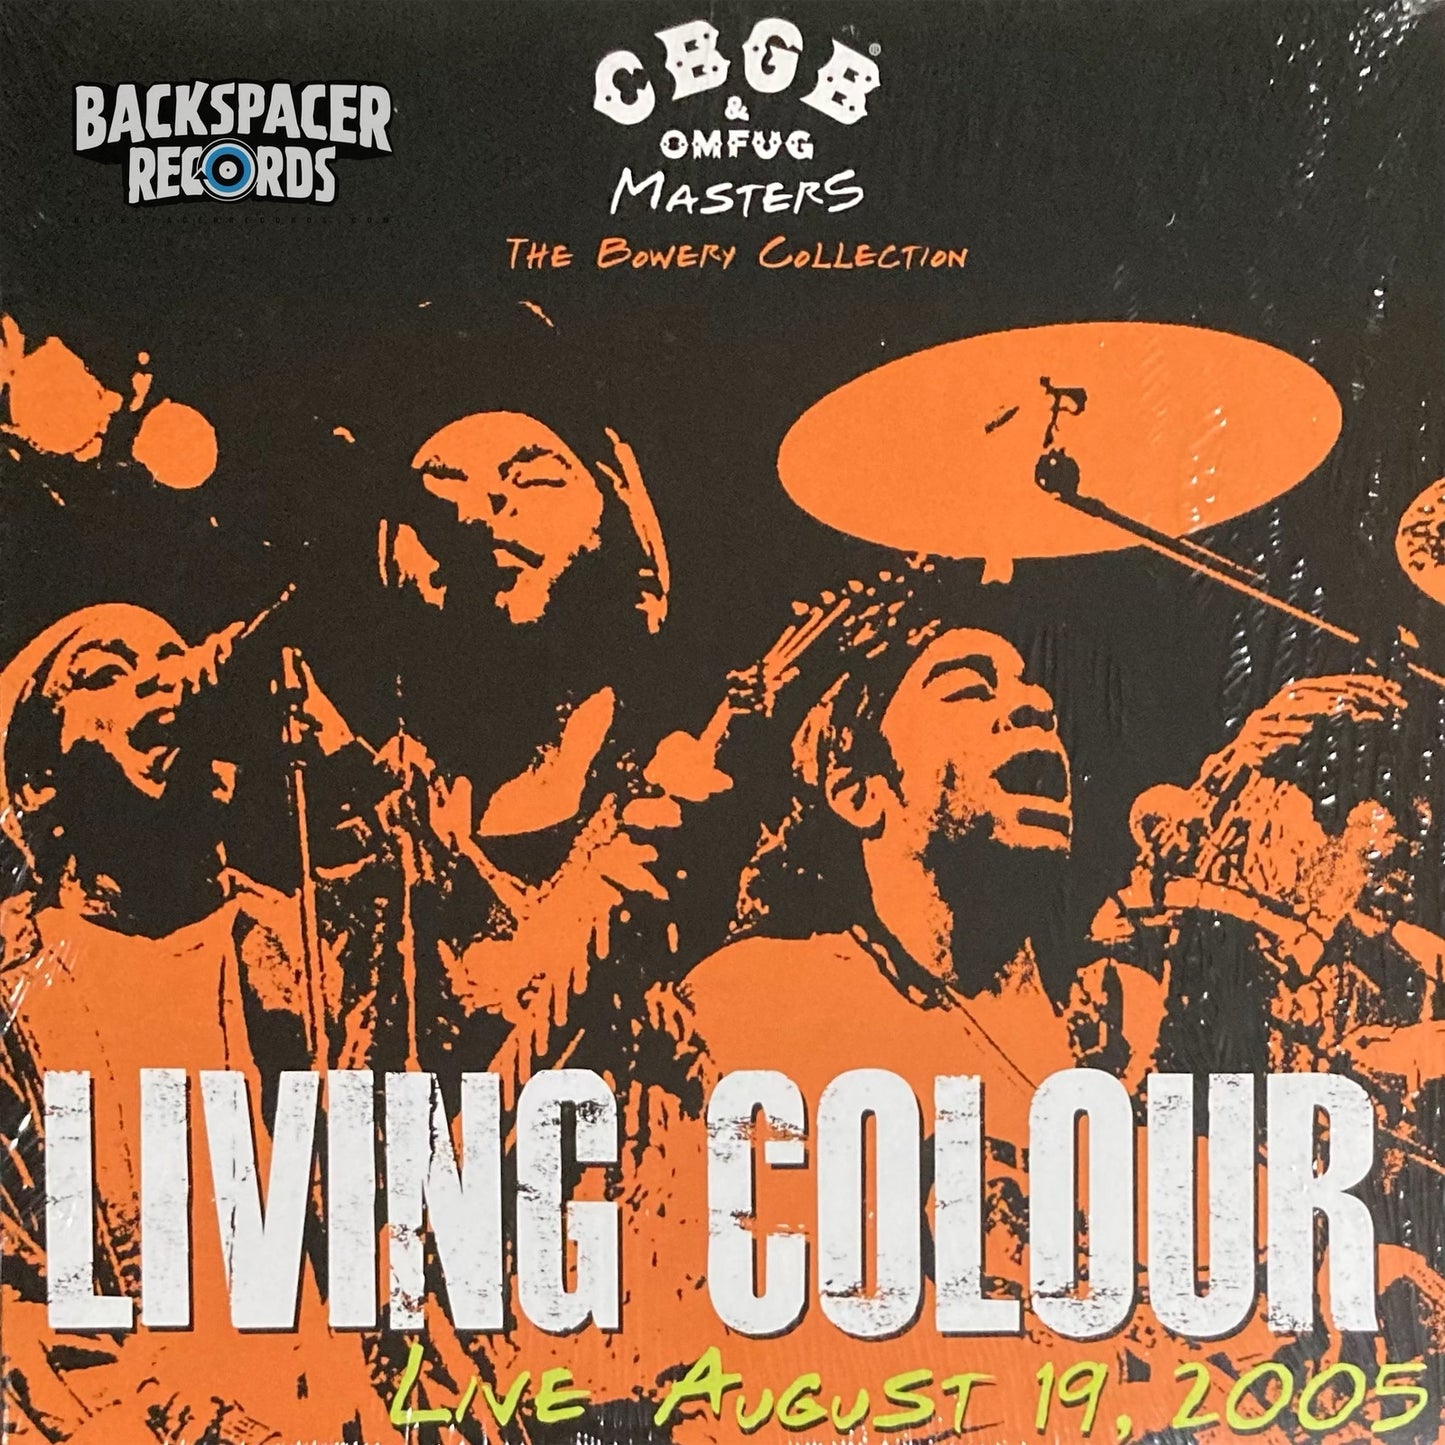 Living Colour – CBGB OMFUG Masters: Live August 19, 2005 The Bowery Collection LP (Sealed)